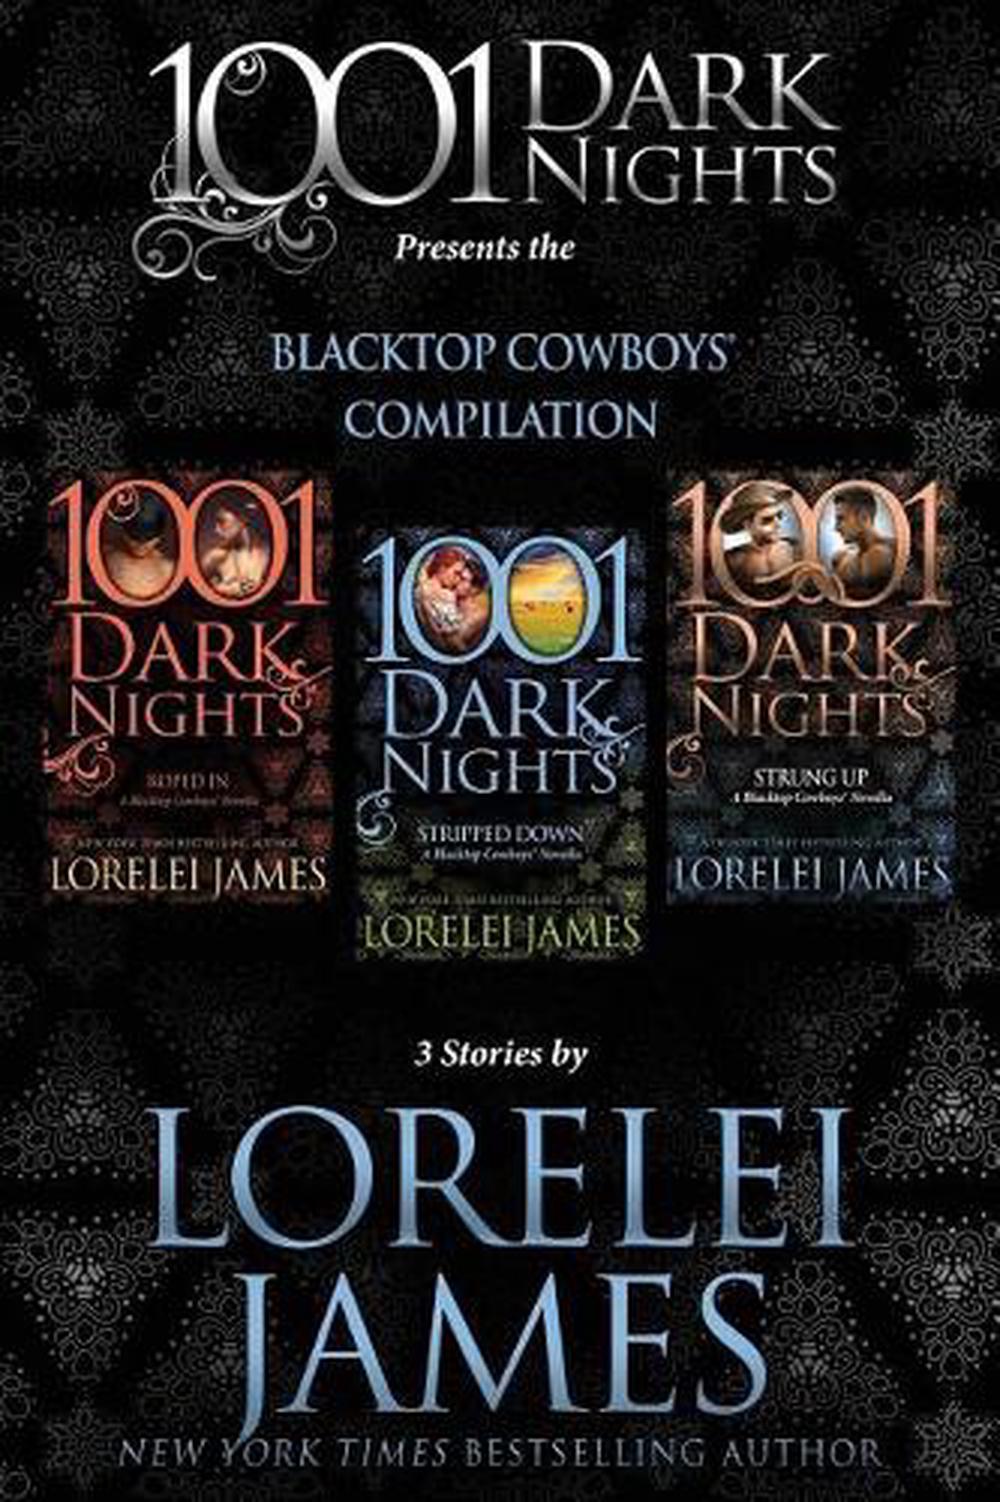 Corralled by Lorelei James